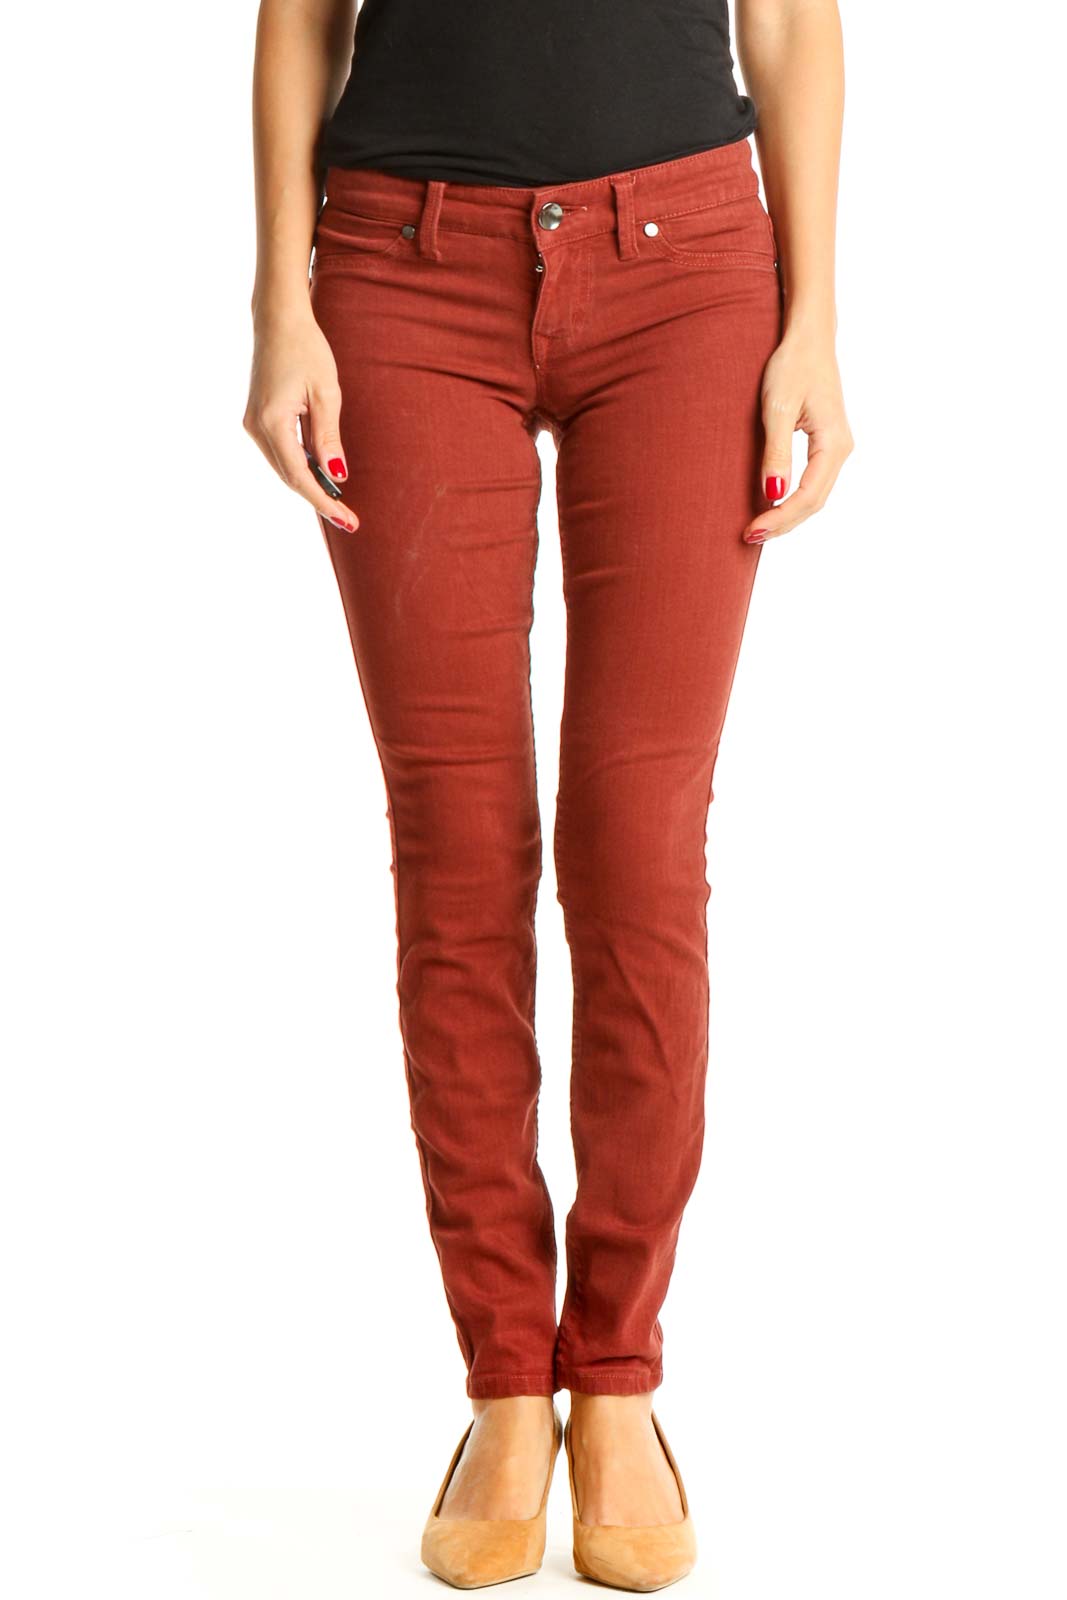 Red Casual Skinny Pants Front